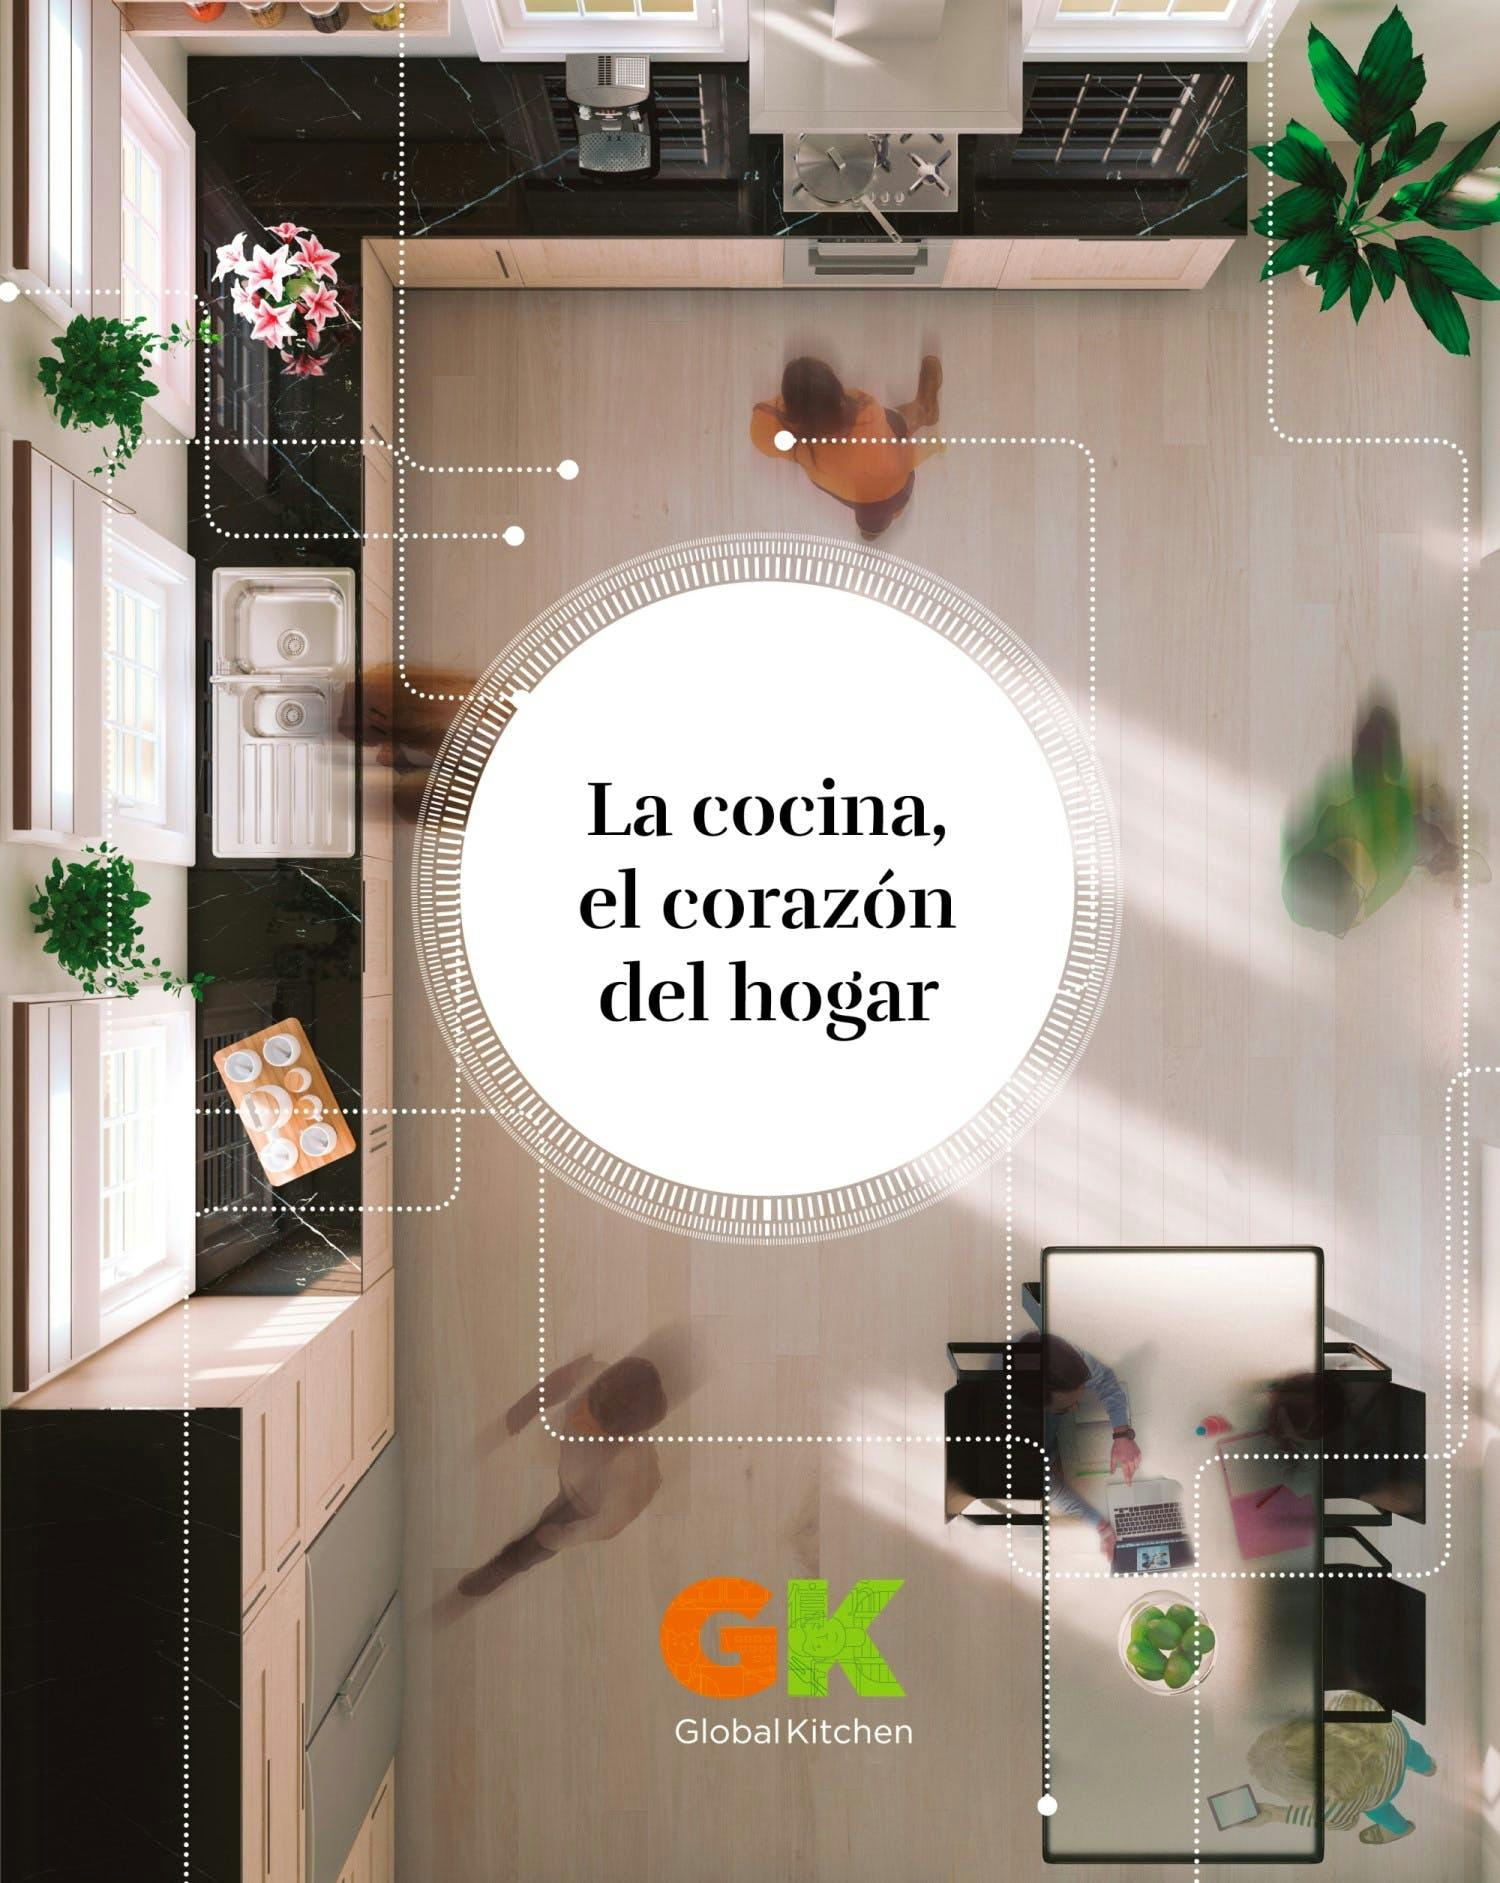 “The kitchen, the heart of the home”